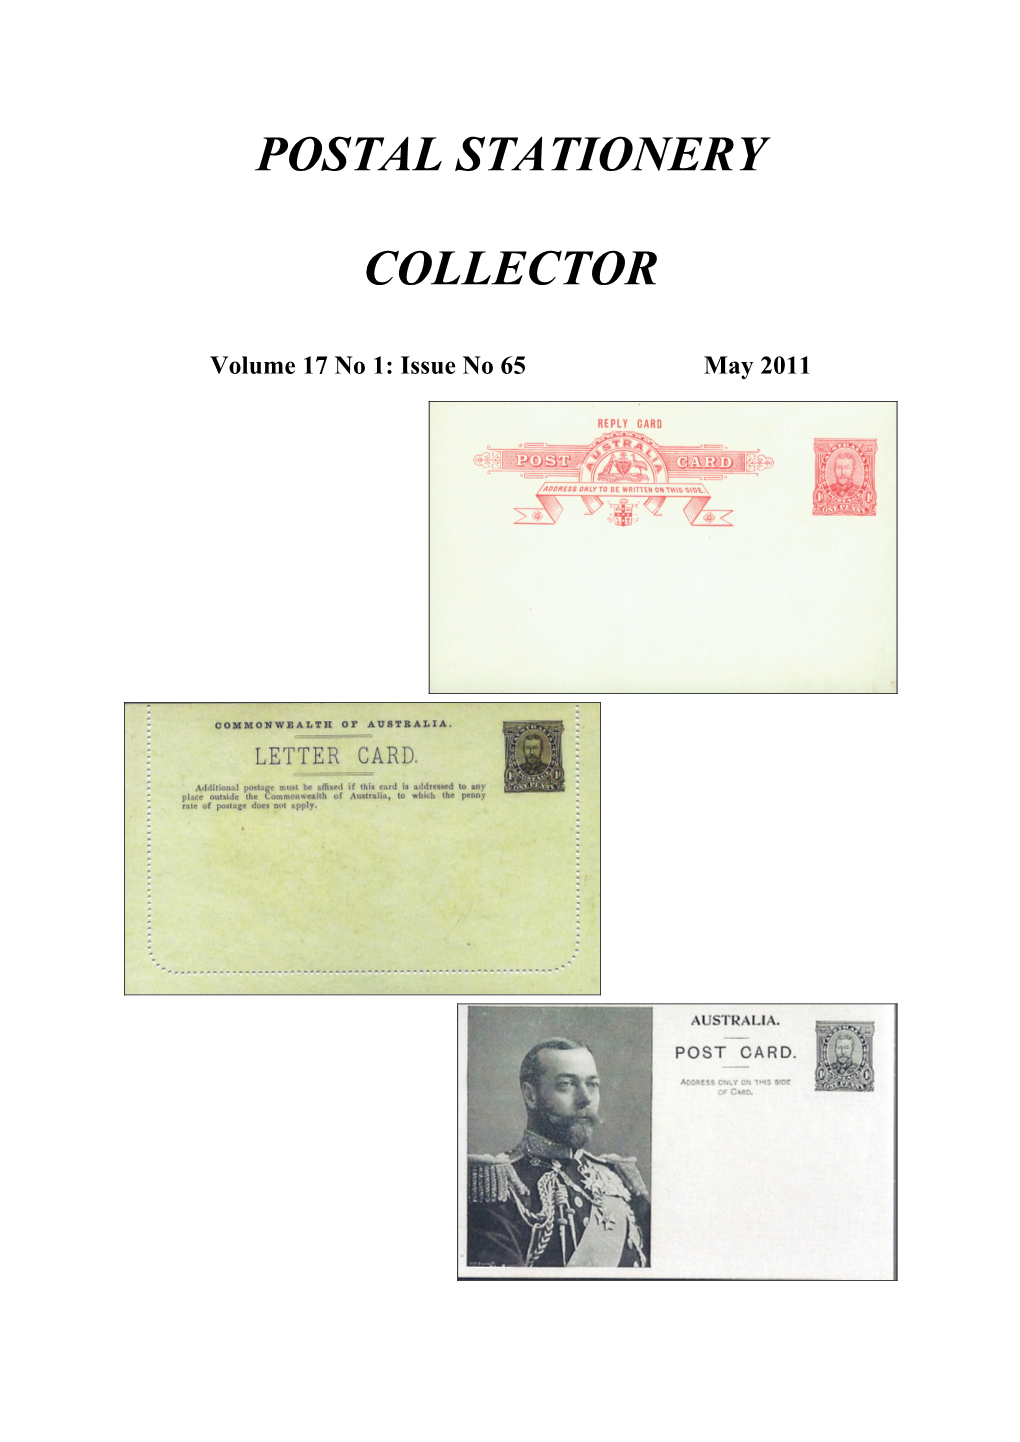 Download a Sample Copy of the Postal Stationery Collector